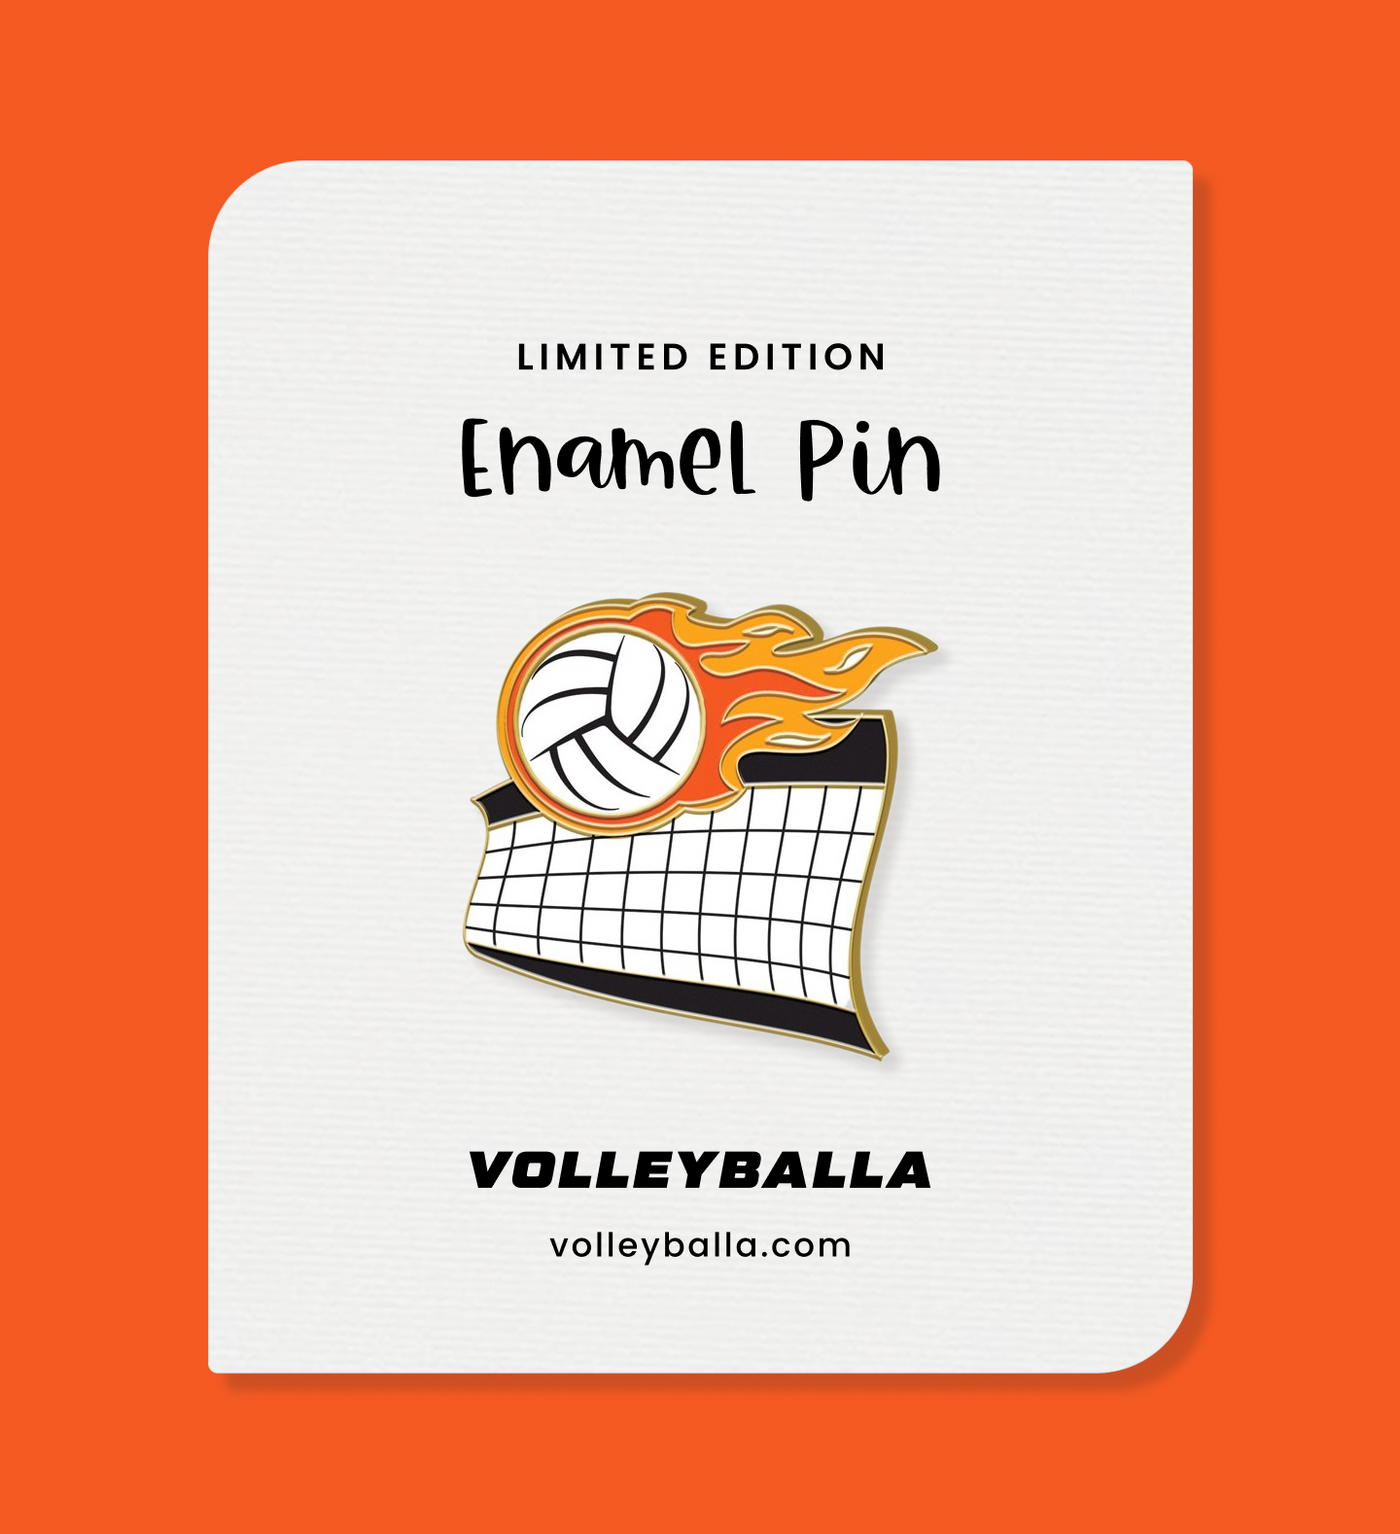 Volleyball Net Flame Enamel Pin